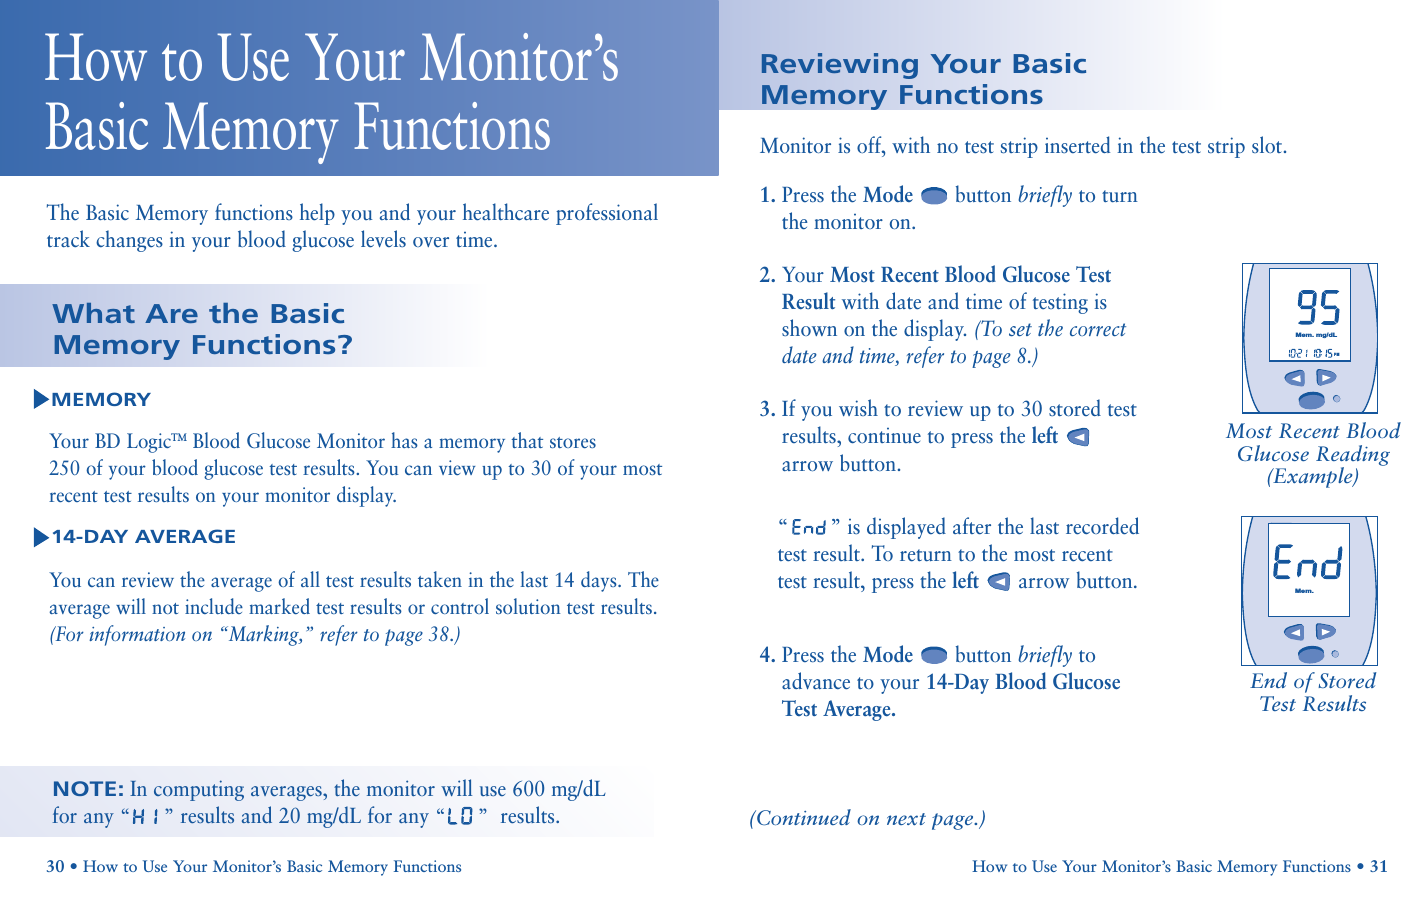        PMMem.mg/dLHow to Use Your Monitor’s Basic Memory Functions • 31Reviewing Your Basic Memory Functions1. Press the Mode button briefly to turnthe monitor on.2. Your Most Recent Blood Glucose TestResult with date and time of testing isshown on the display. (To set the correctdate and time, refer to page 8.)3. If you wish to review up to 30 stored testresults, continue to press the leftarrow button. “”is displayed after the last recordedtest result. To return to the most recenttest result, press the left arrow button.4. Press the Mode button briefly toadvance to your 14-Day Blood GlucoseTest Average.Monitor is off, with no test strip inserted in the test strip slot.Most Recent BloodGlucose Reading(Example)End of StoredTest Results(Continued on next page.)30 • How to Use Your Monitor’s Basic Memory FunctionsThe Basic Memory functions help you and your healthcare professionaltrack changes in your blood glucose levels over time.How to Use Your Monitor’sBasic Memory FunctionsNOTE:In computing averages, the monitor will use 600 mg/dL for any “”results and 20 mg/dL for any “”results.MEMORYYour BD LogicTM Blood Glucose Monitor has a memory that stores 250 of your blood glucose test results. You can view up to 30 of your mostrecent test results on your monitor display. 14-DAY AVERAGEYou can review the average of all test results taken in the last 14 days. Theaverage will not include marked test results or control solution test results.(For information on “Marking,” refer to page 38.)What Are the Basic Memory Functions?Mem.